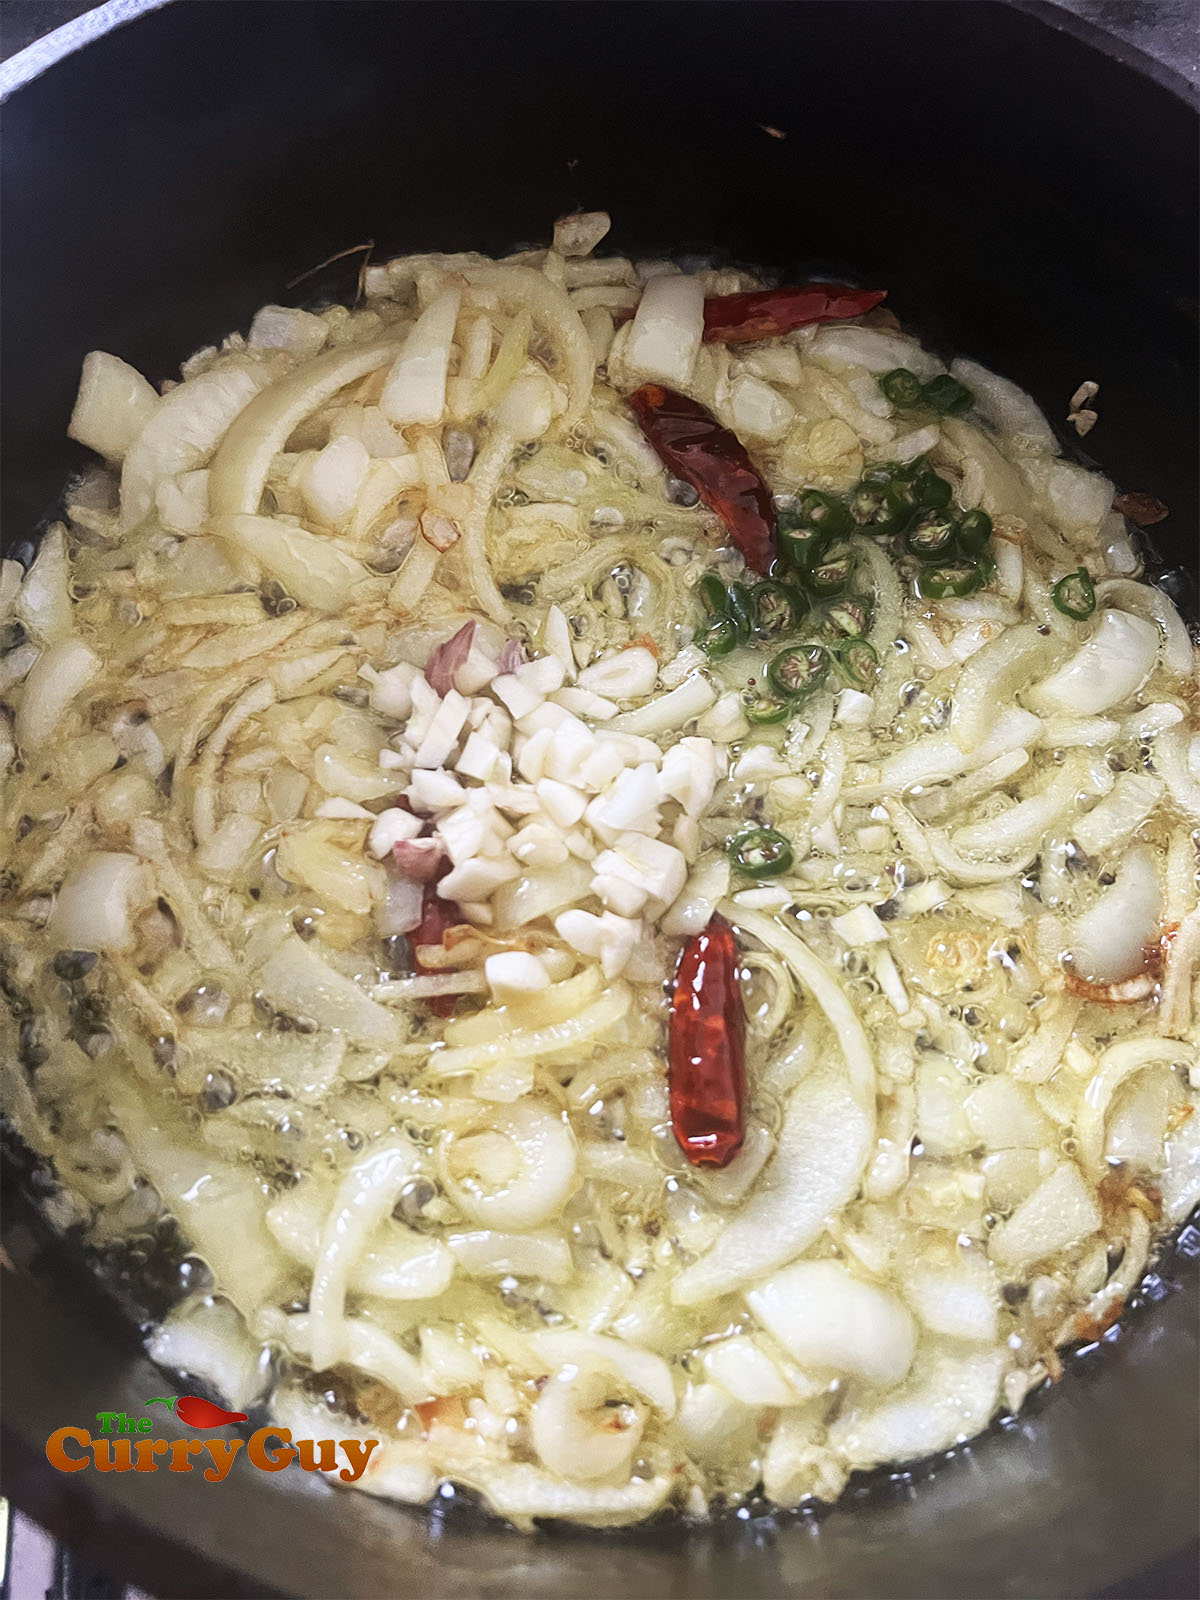 Adding the chopped onions to fry.